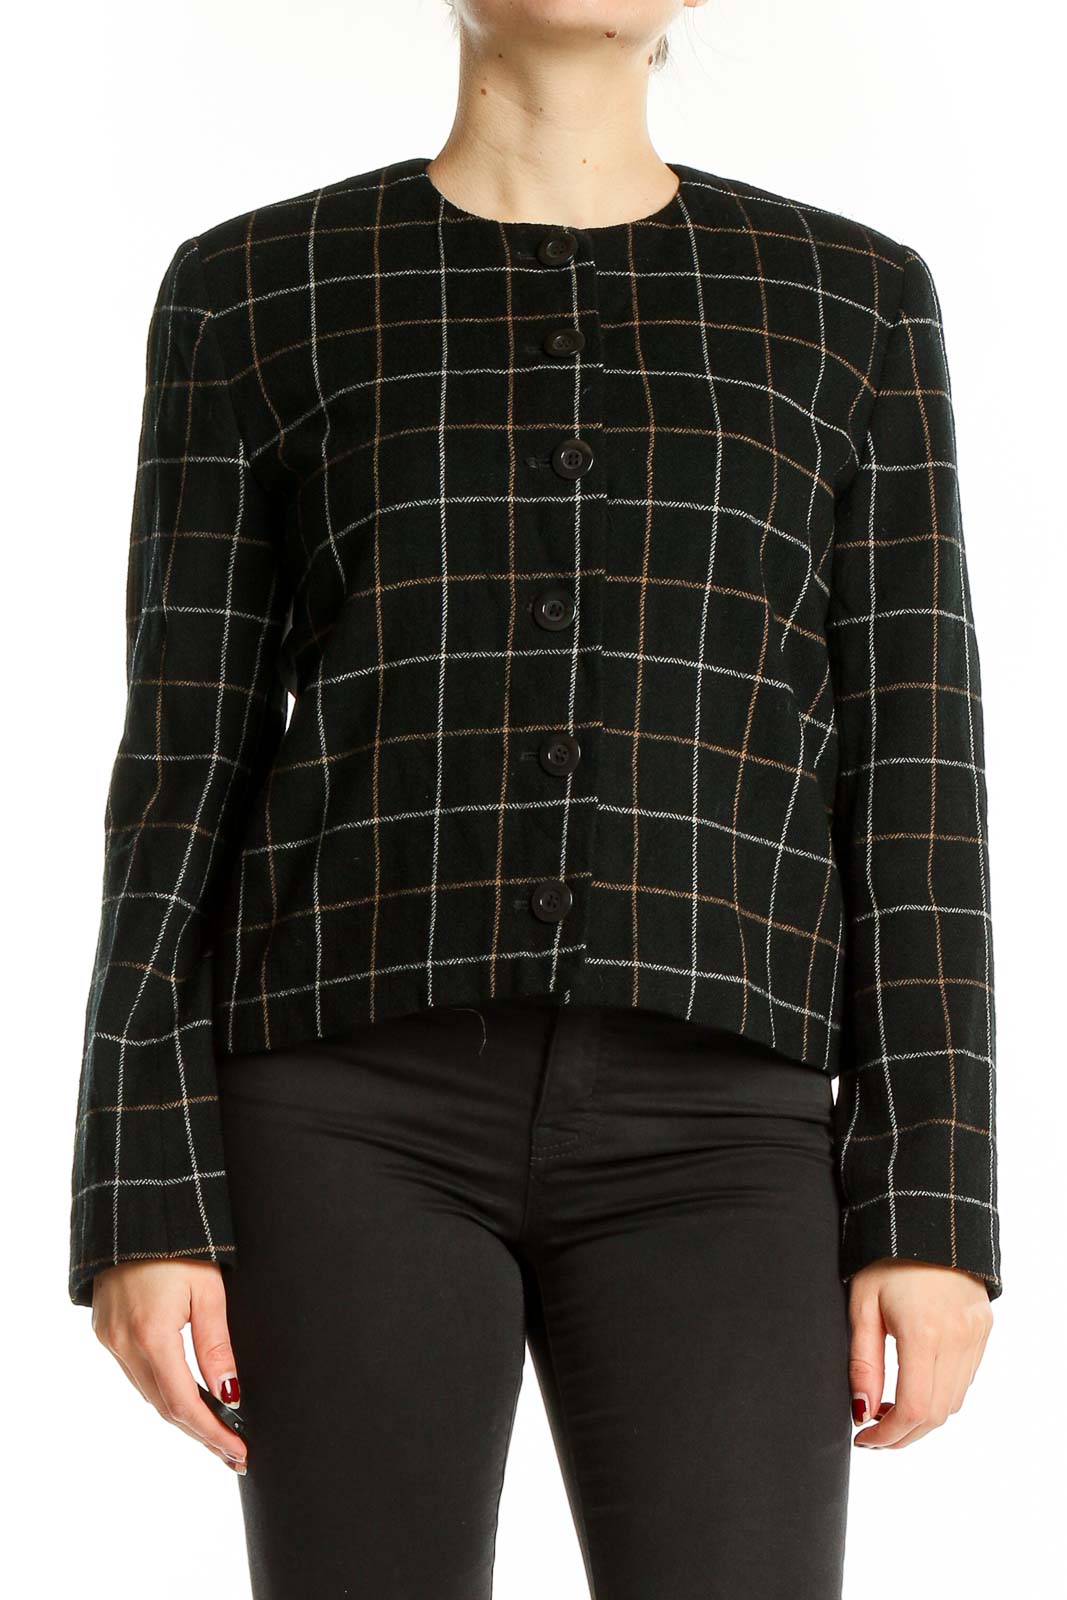 Black Checkered Jacket Front